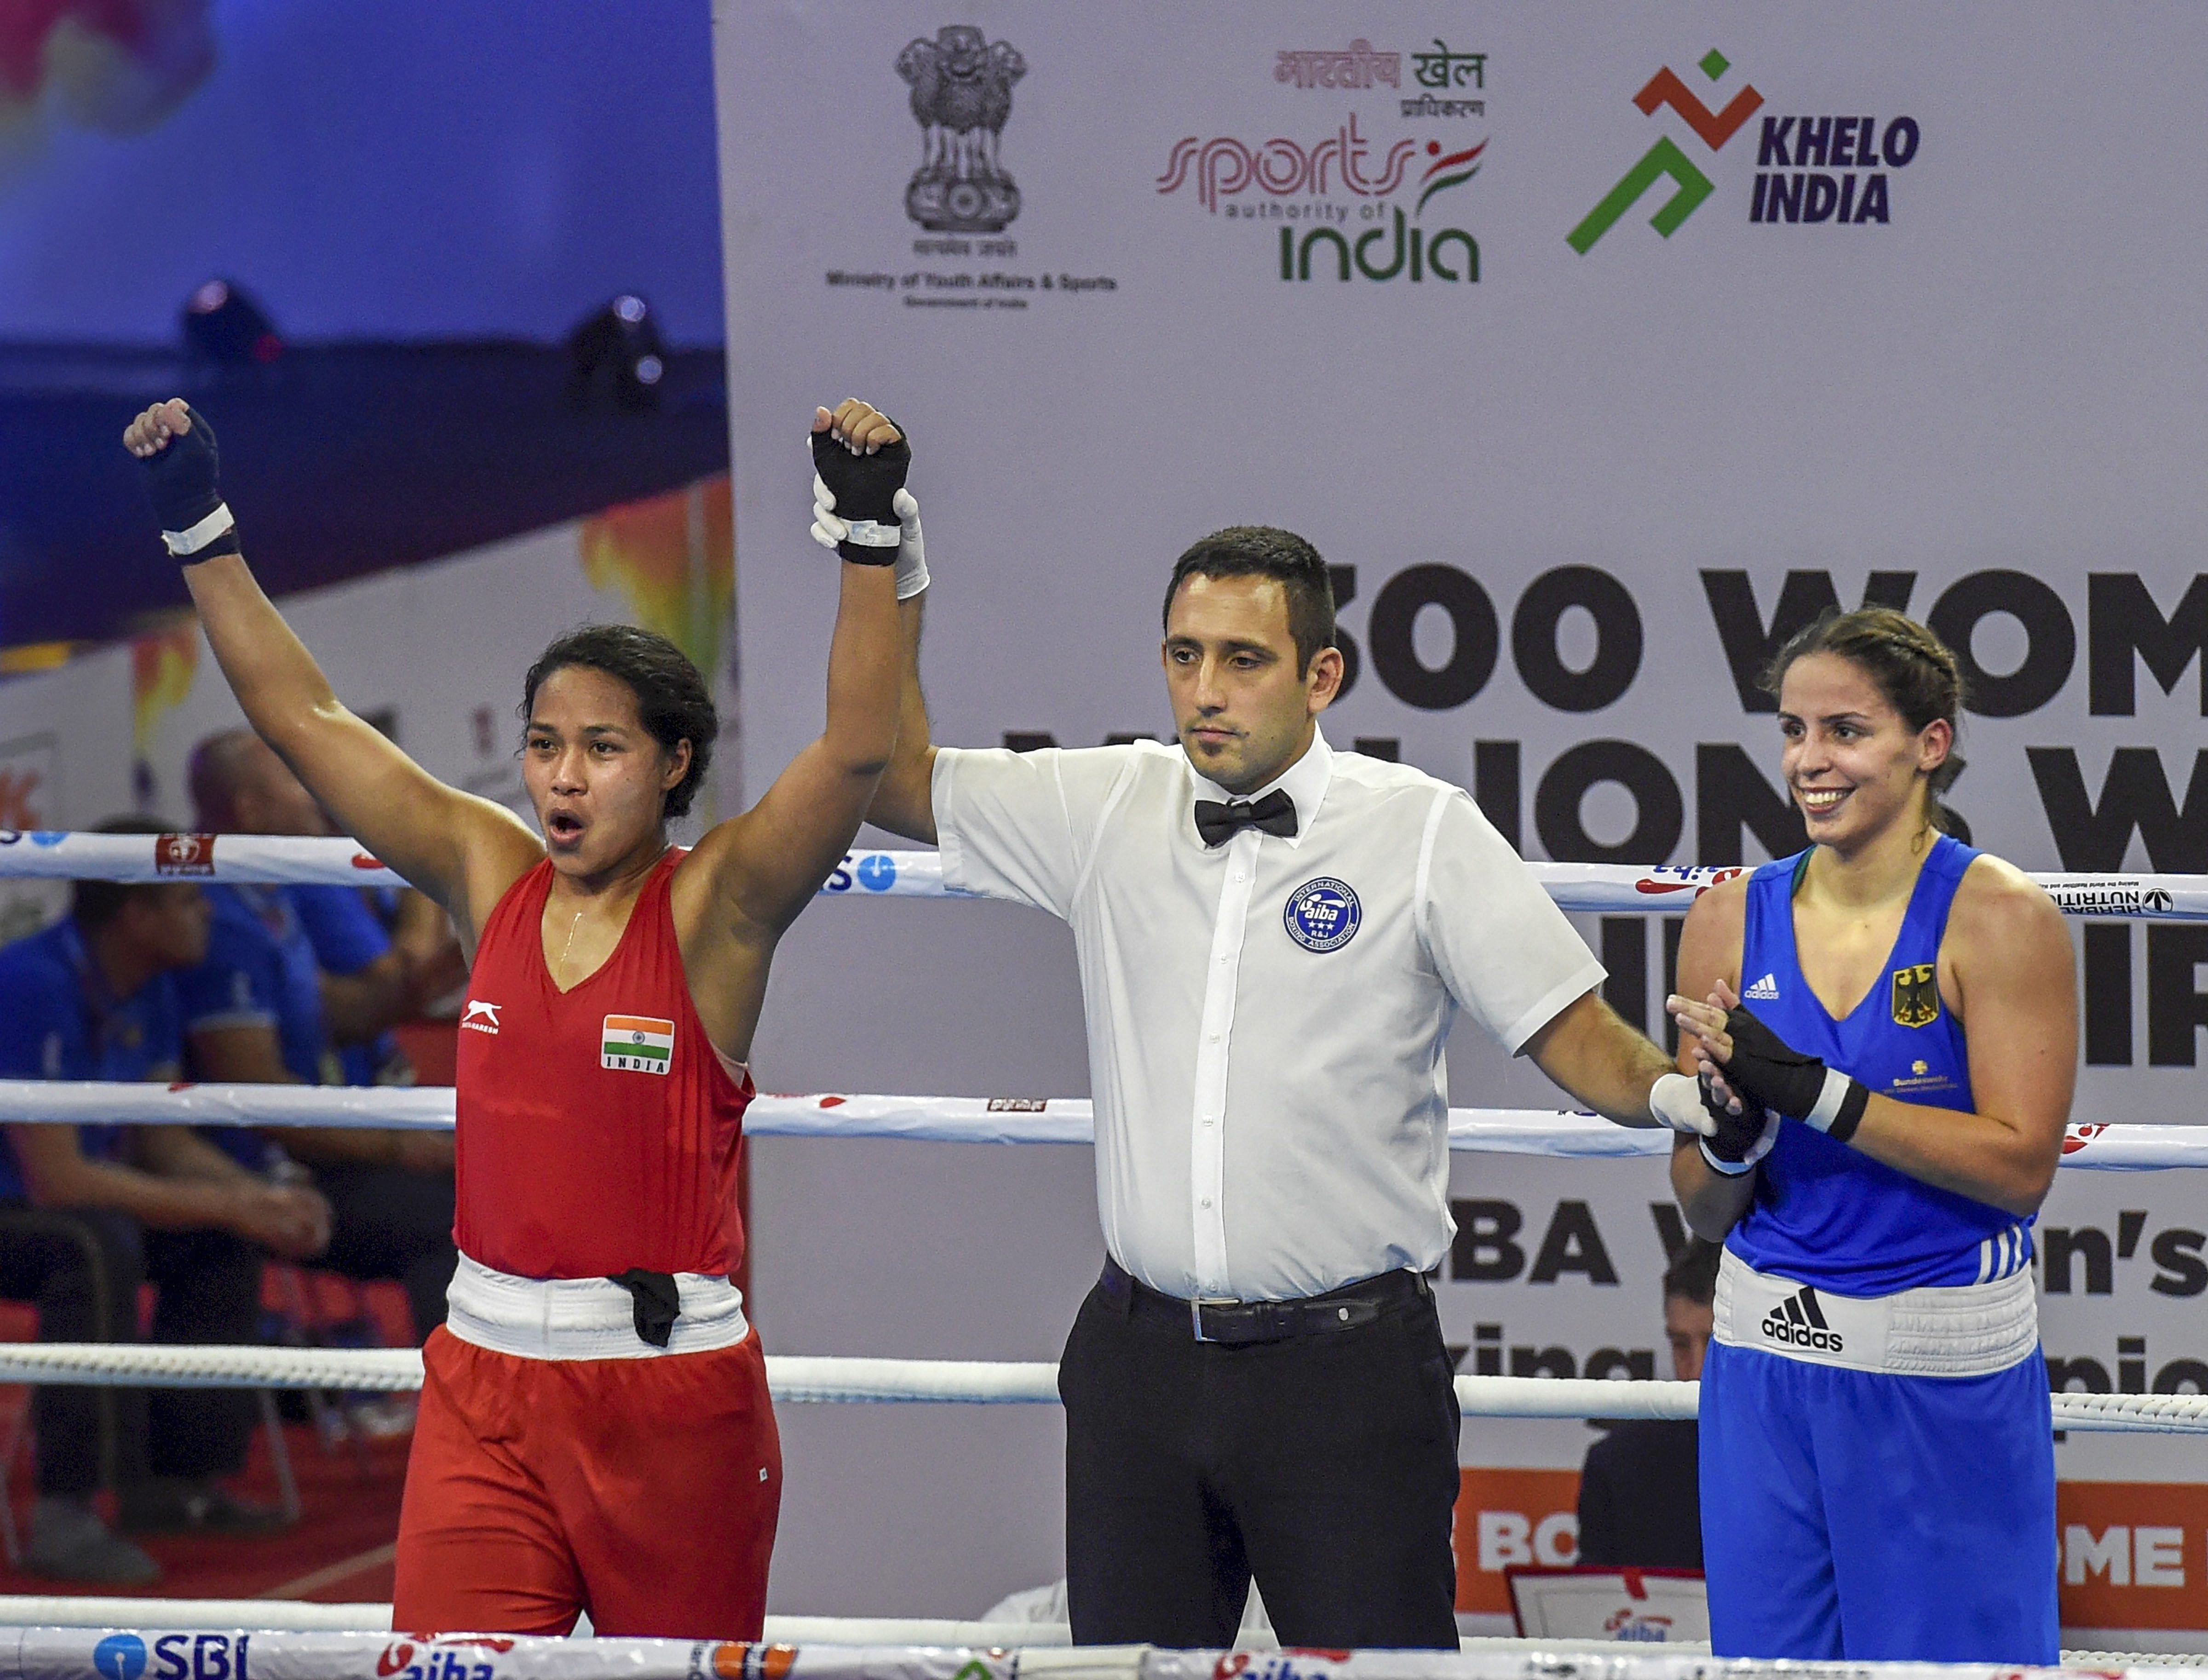 India's Kachari Bhagyabati (Red) being declared winner against Irina-Nicoletta Schonberge of Germany in the women's 81kg category bout at the AIBA Women's World Boxing Championships, in New Delhi - PTI